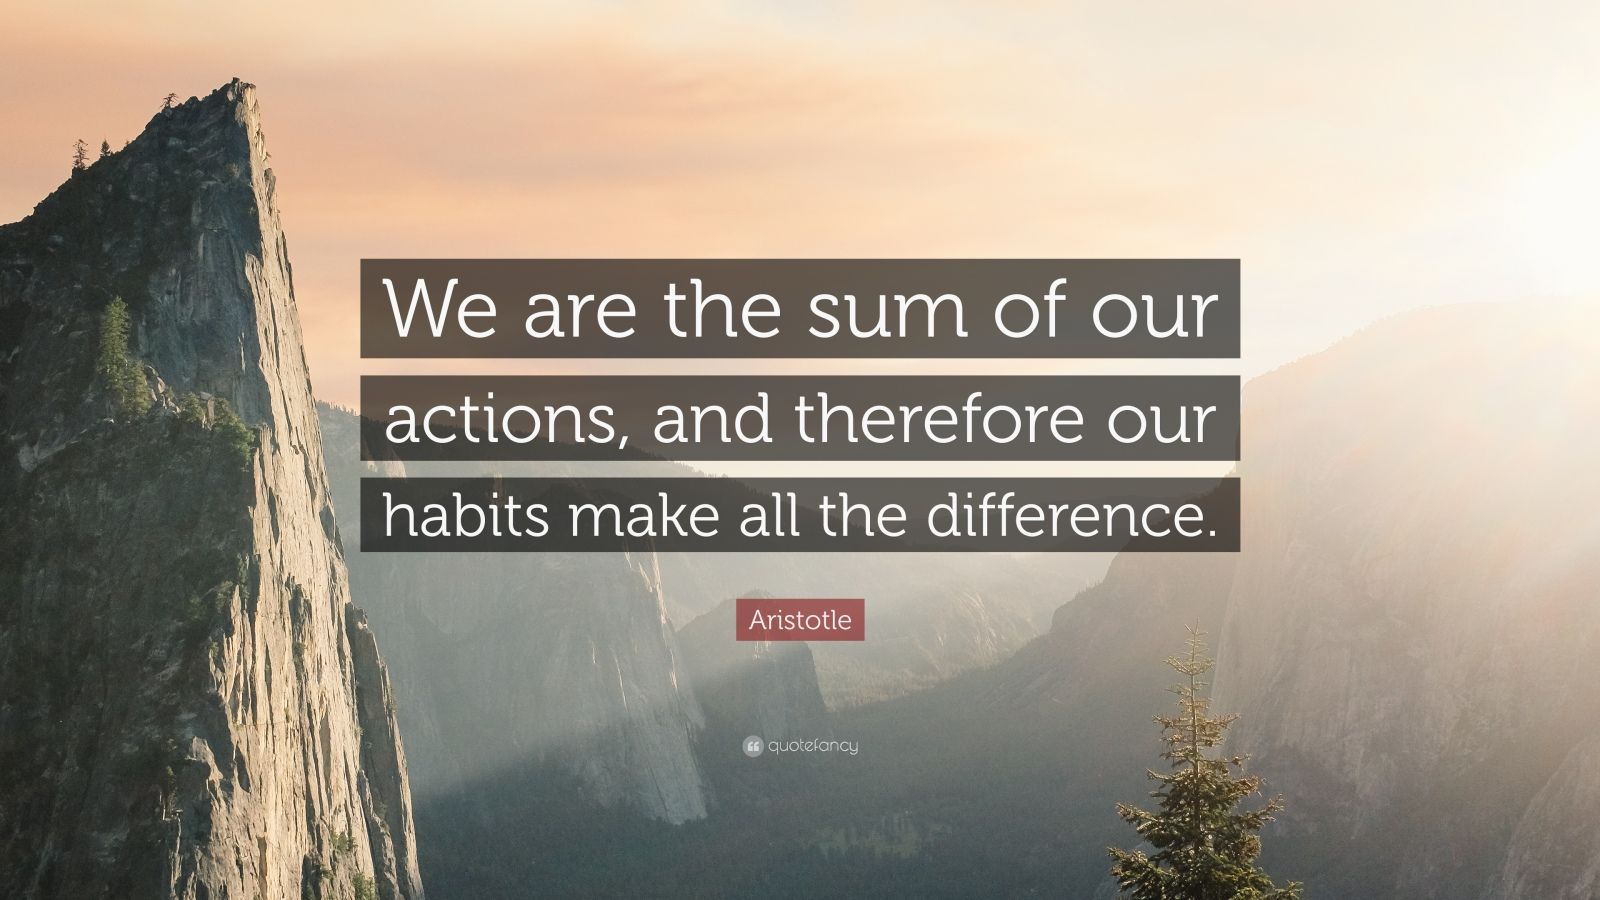 Aristotle Quote “We are the sum of our actions, and